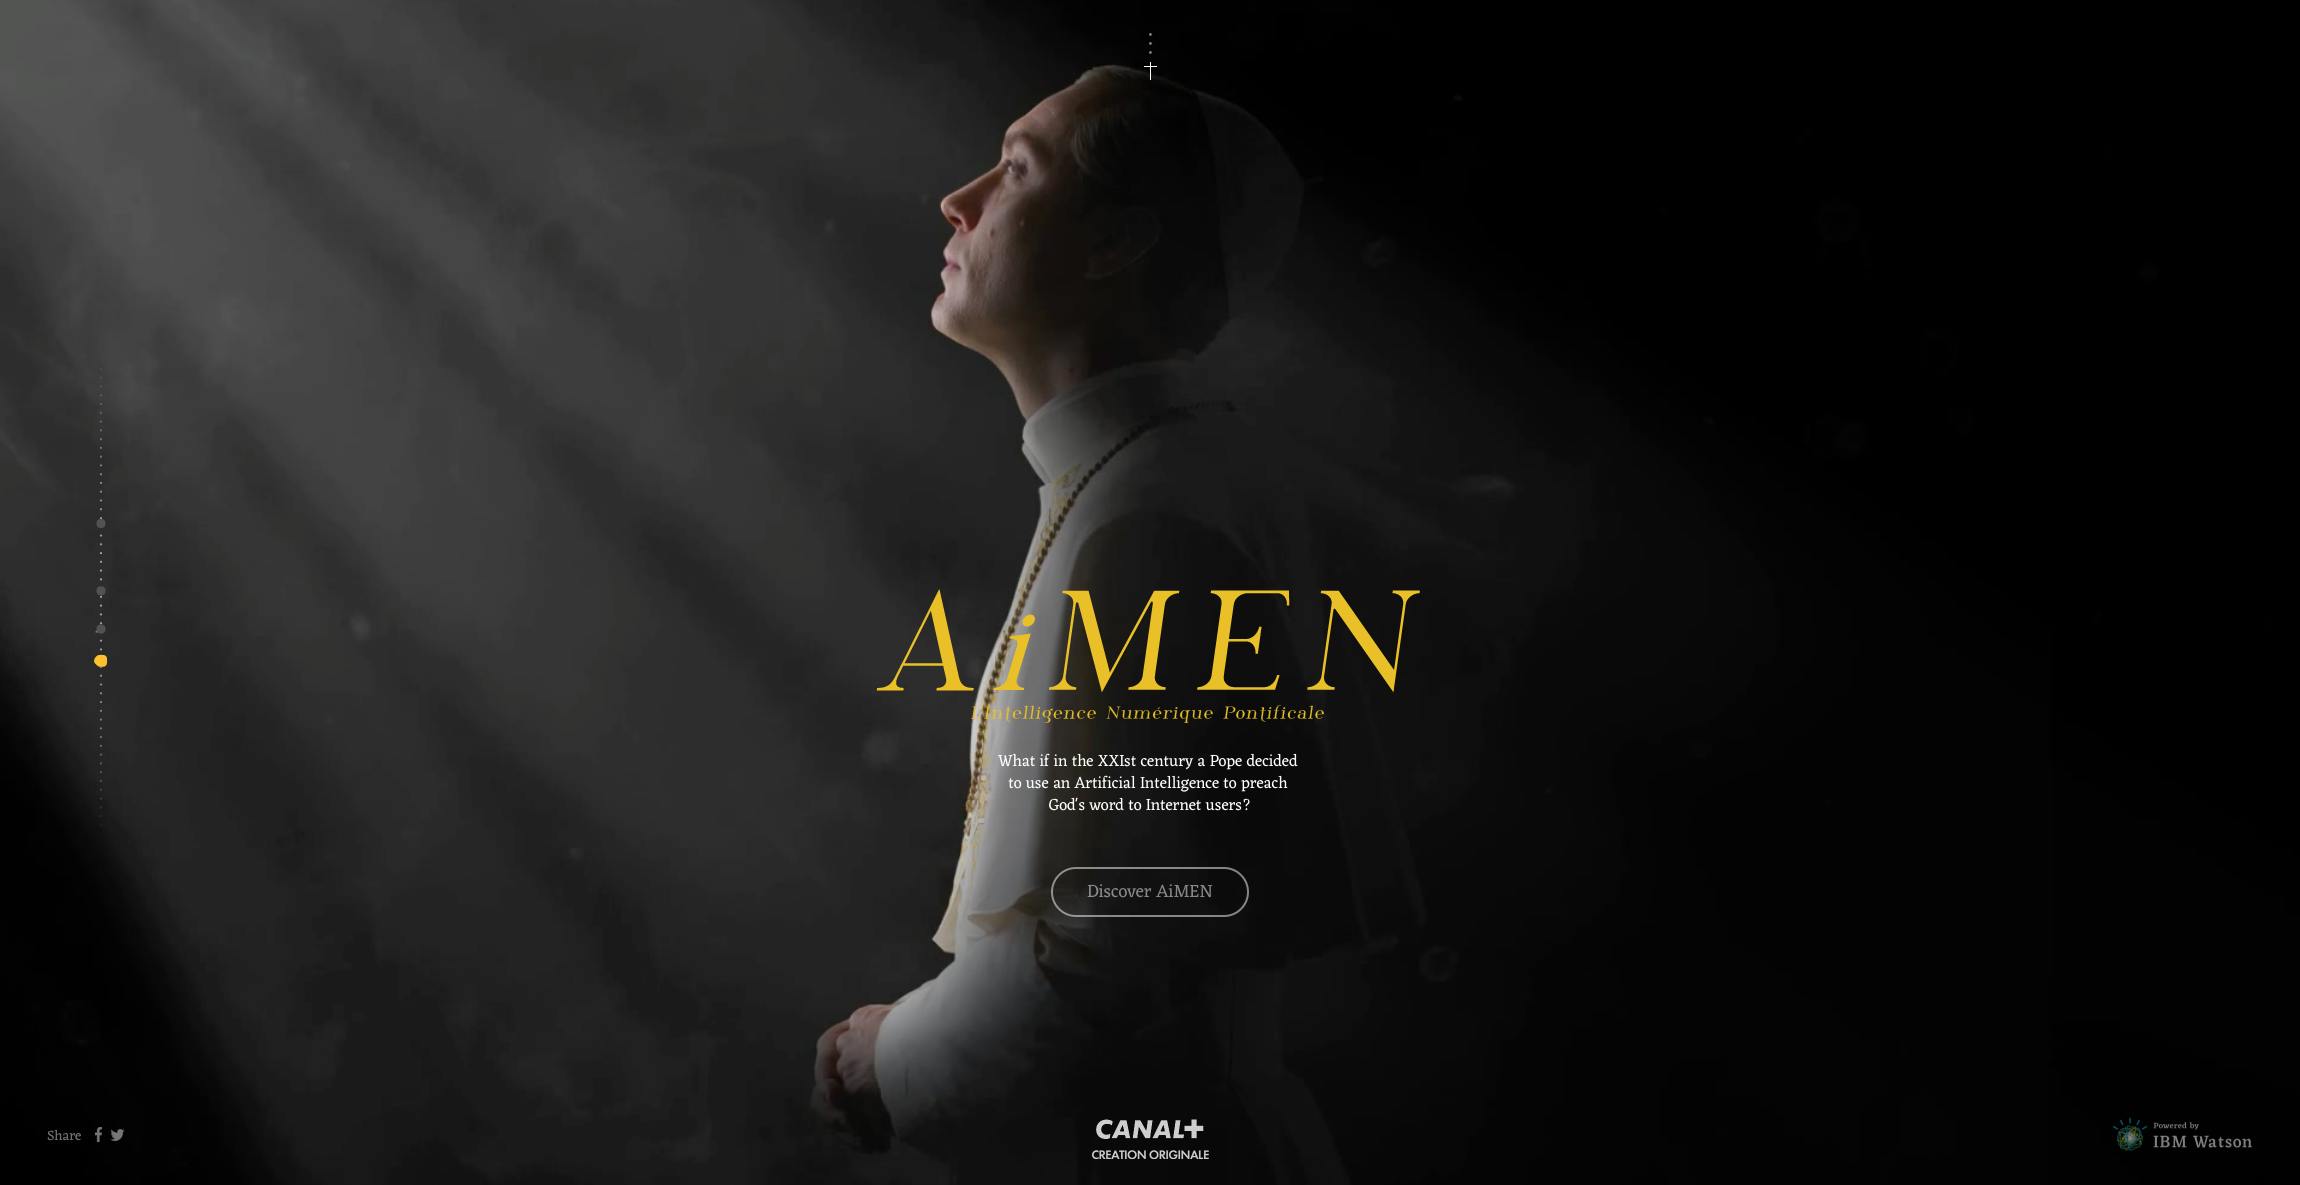 Screenshot of the promotional website AiMEN for the mini-series The Young Pope